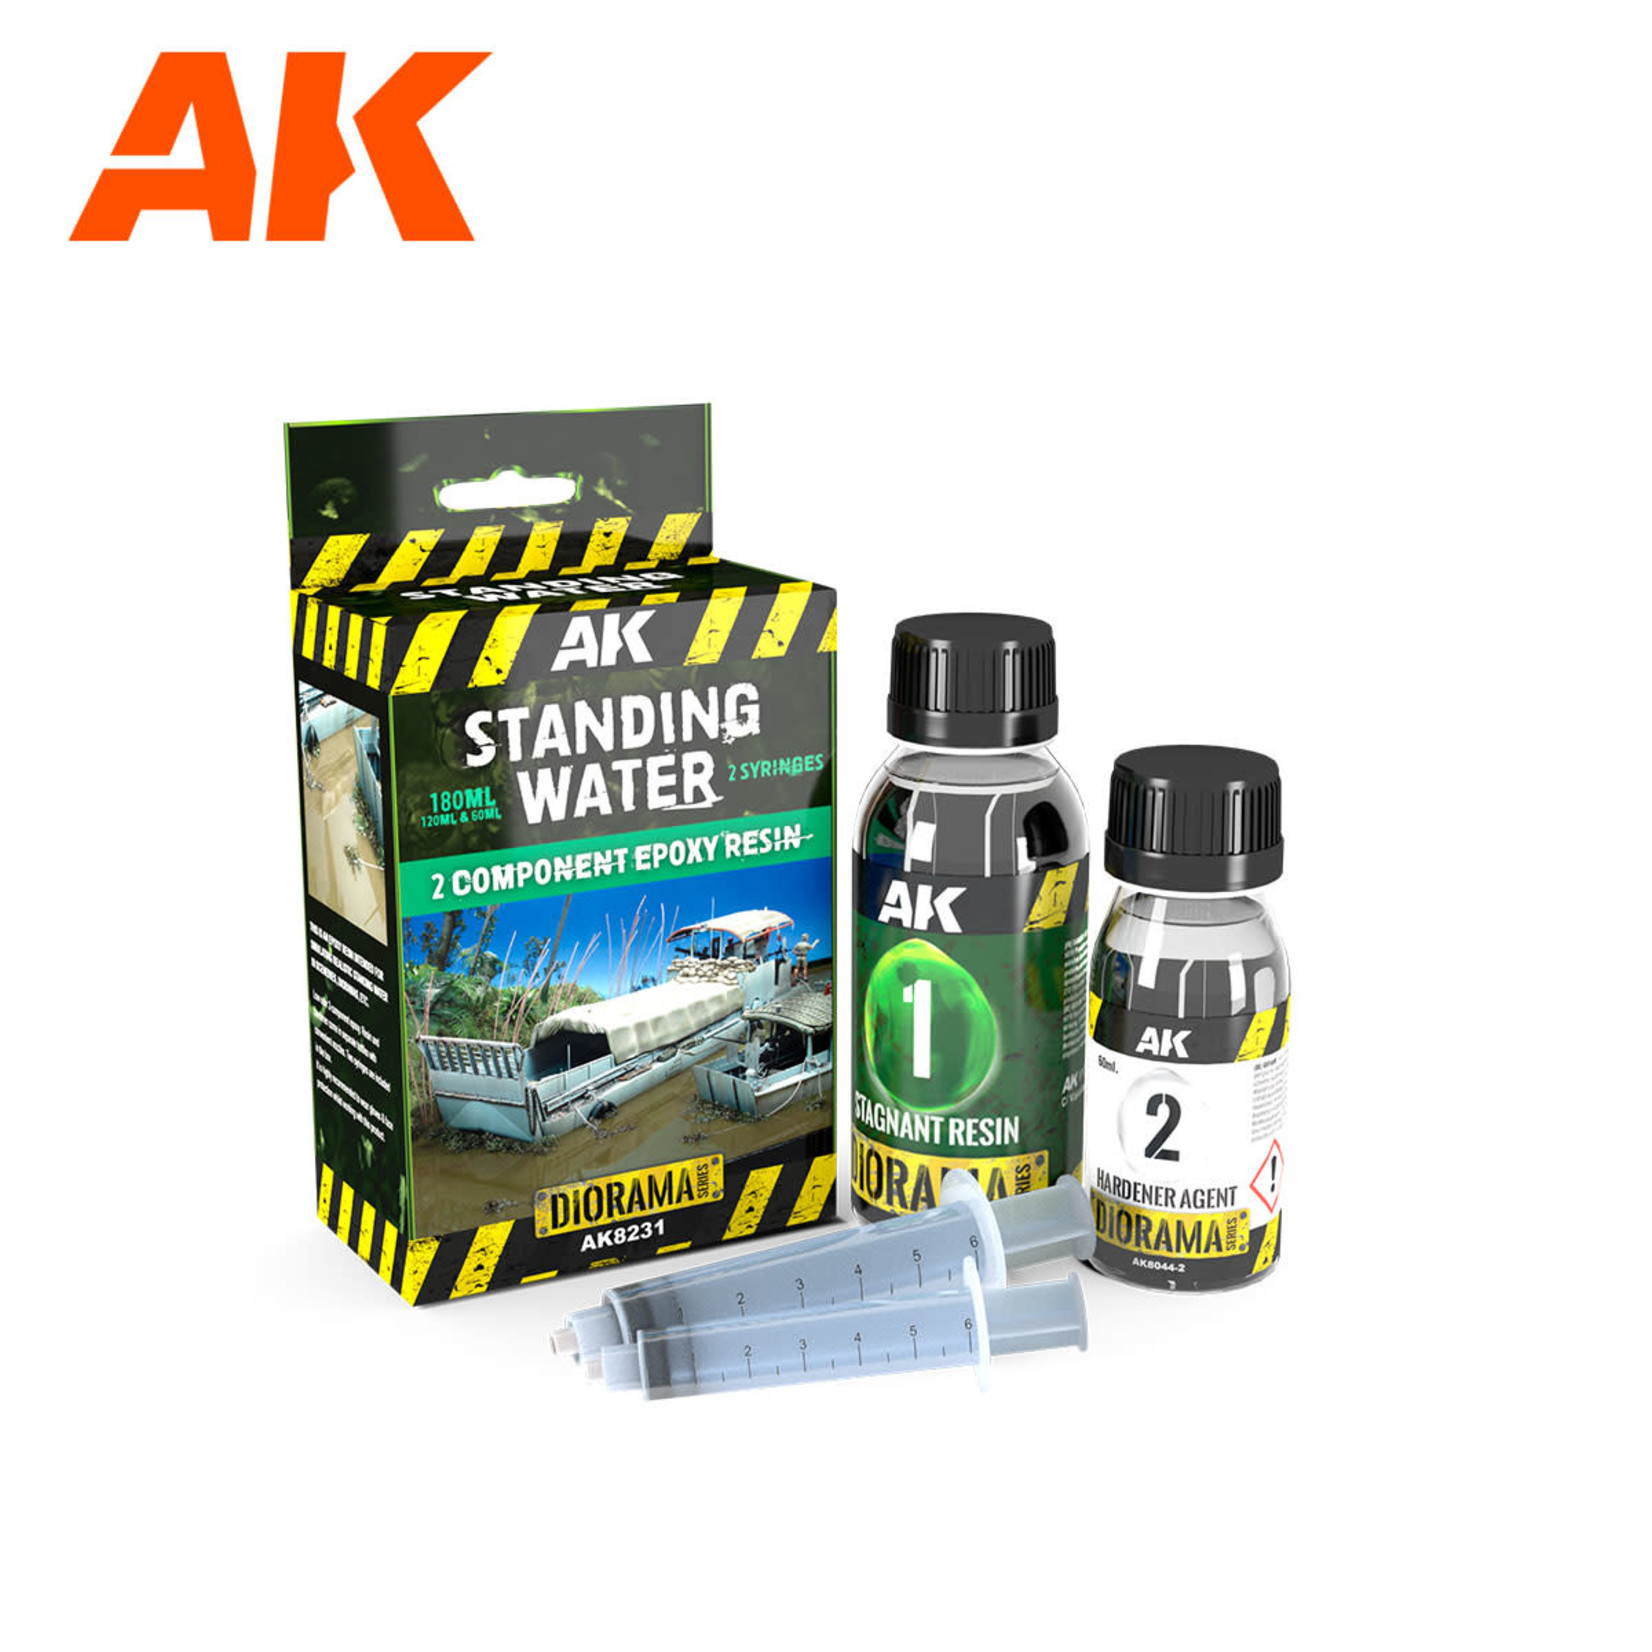 AK Interactive AK-8231 Resin Stagnant Water Components Epoxy Resin (180ml)